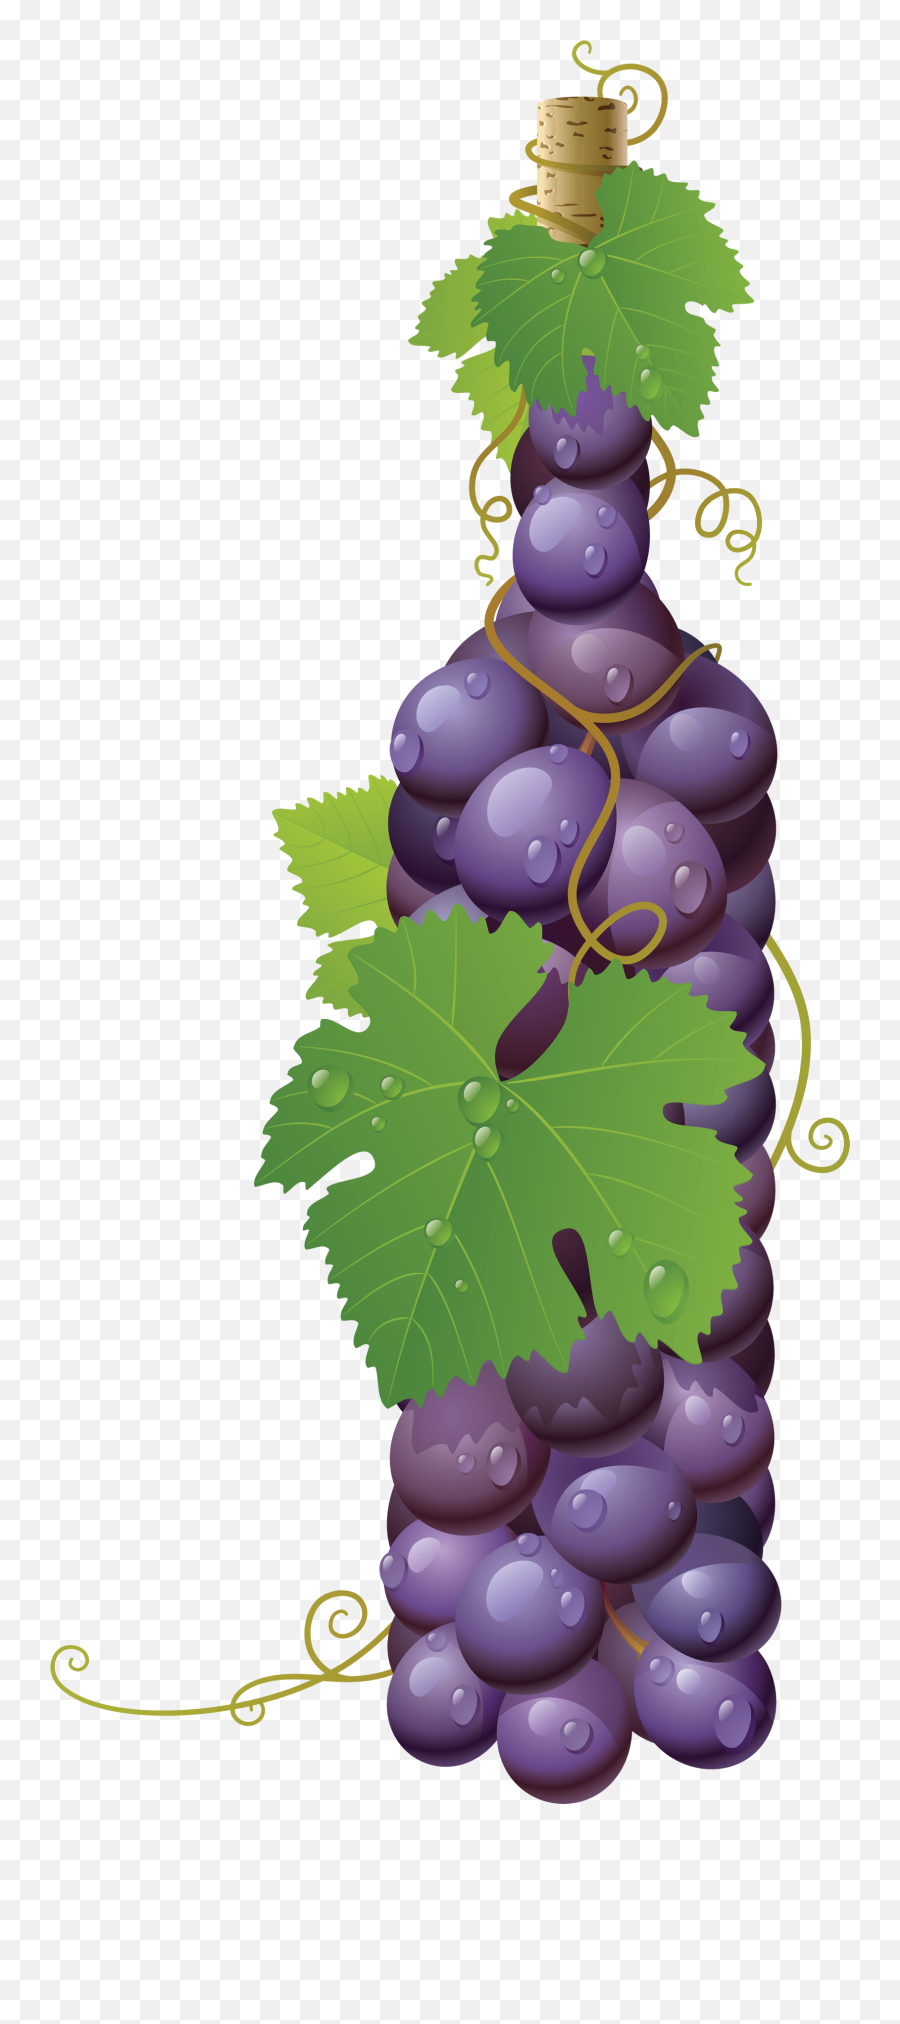 Grape Png Images Are Free To Download - Grapes Vector,Grape Png